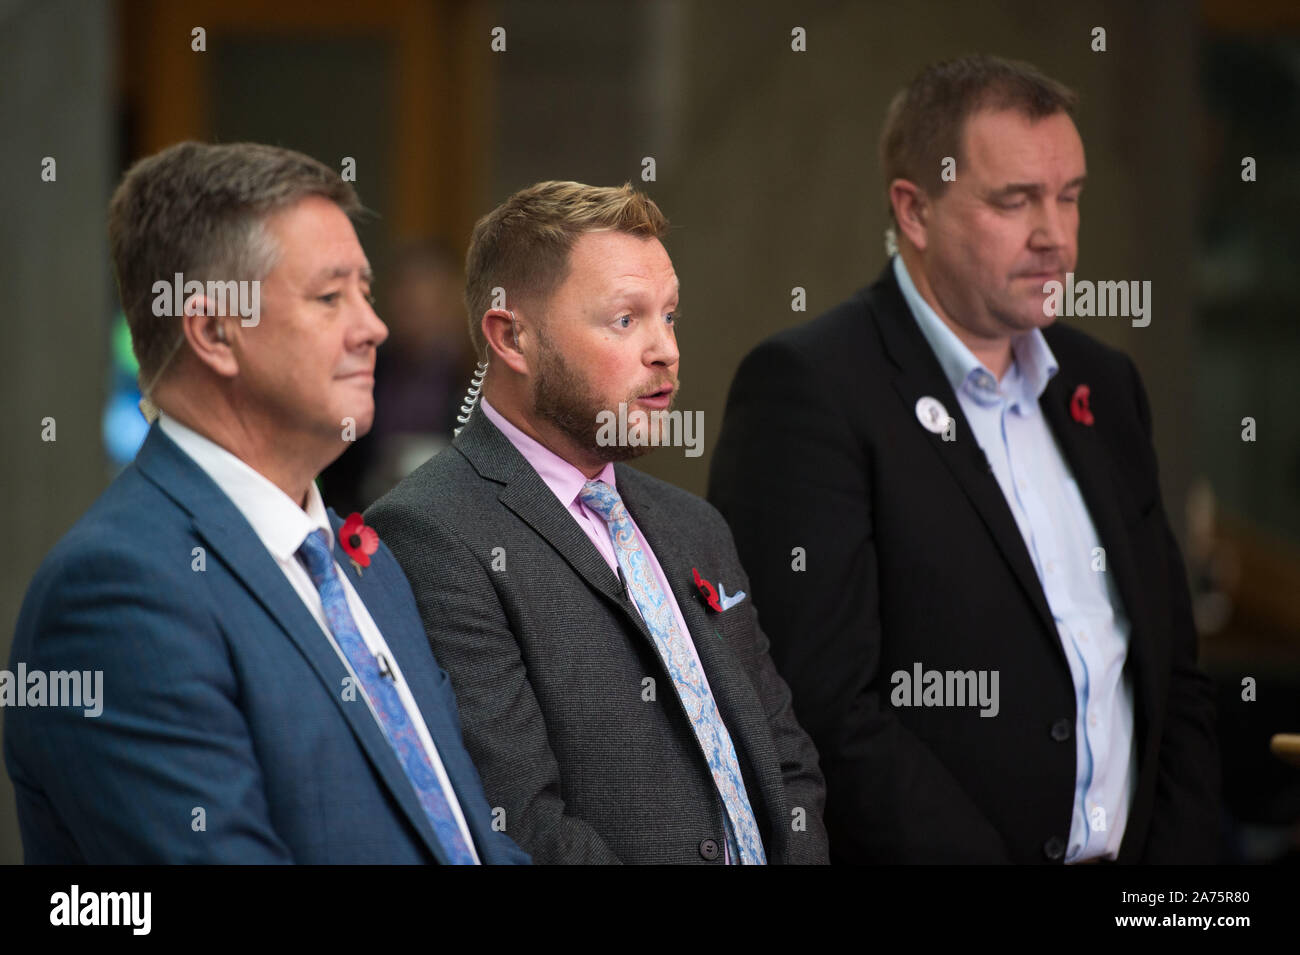 Edinburgh, 30 October 2019. Pictured: (left-right) Keith Brown MSP - Depute Leader of the Scottish National Party (SNP); Jamie Green MSP - Shadow Cabinet Secretary for Transport, Infrastructure and Connectivity; Neil Findlay MSP - Scottish Labour Party Member for Lothian. Scenes from inside the Scottish Parliament in Edinburgh.  Credit: Colin D Fisher/CDFIMAGES.COM Stock Photo